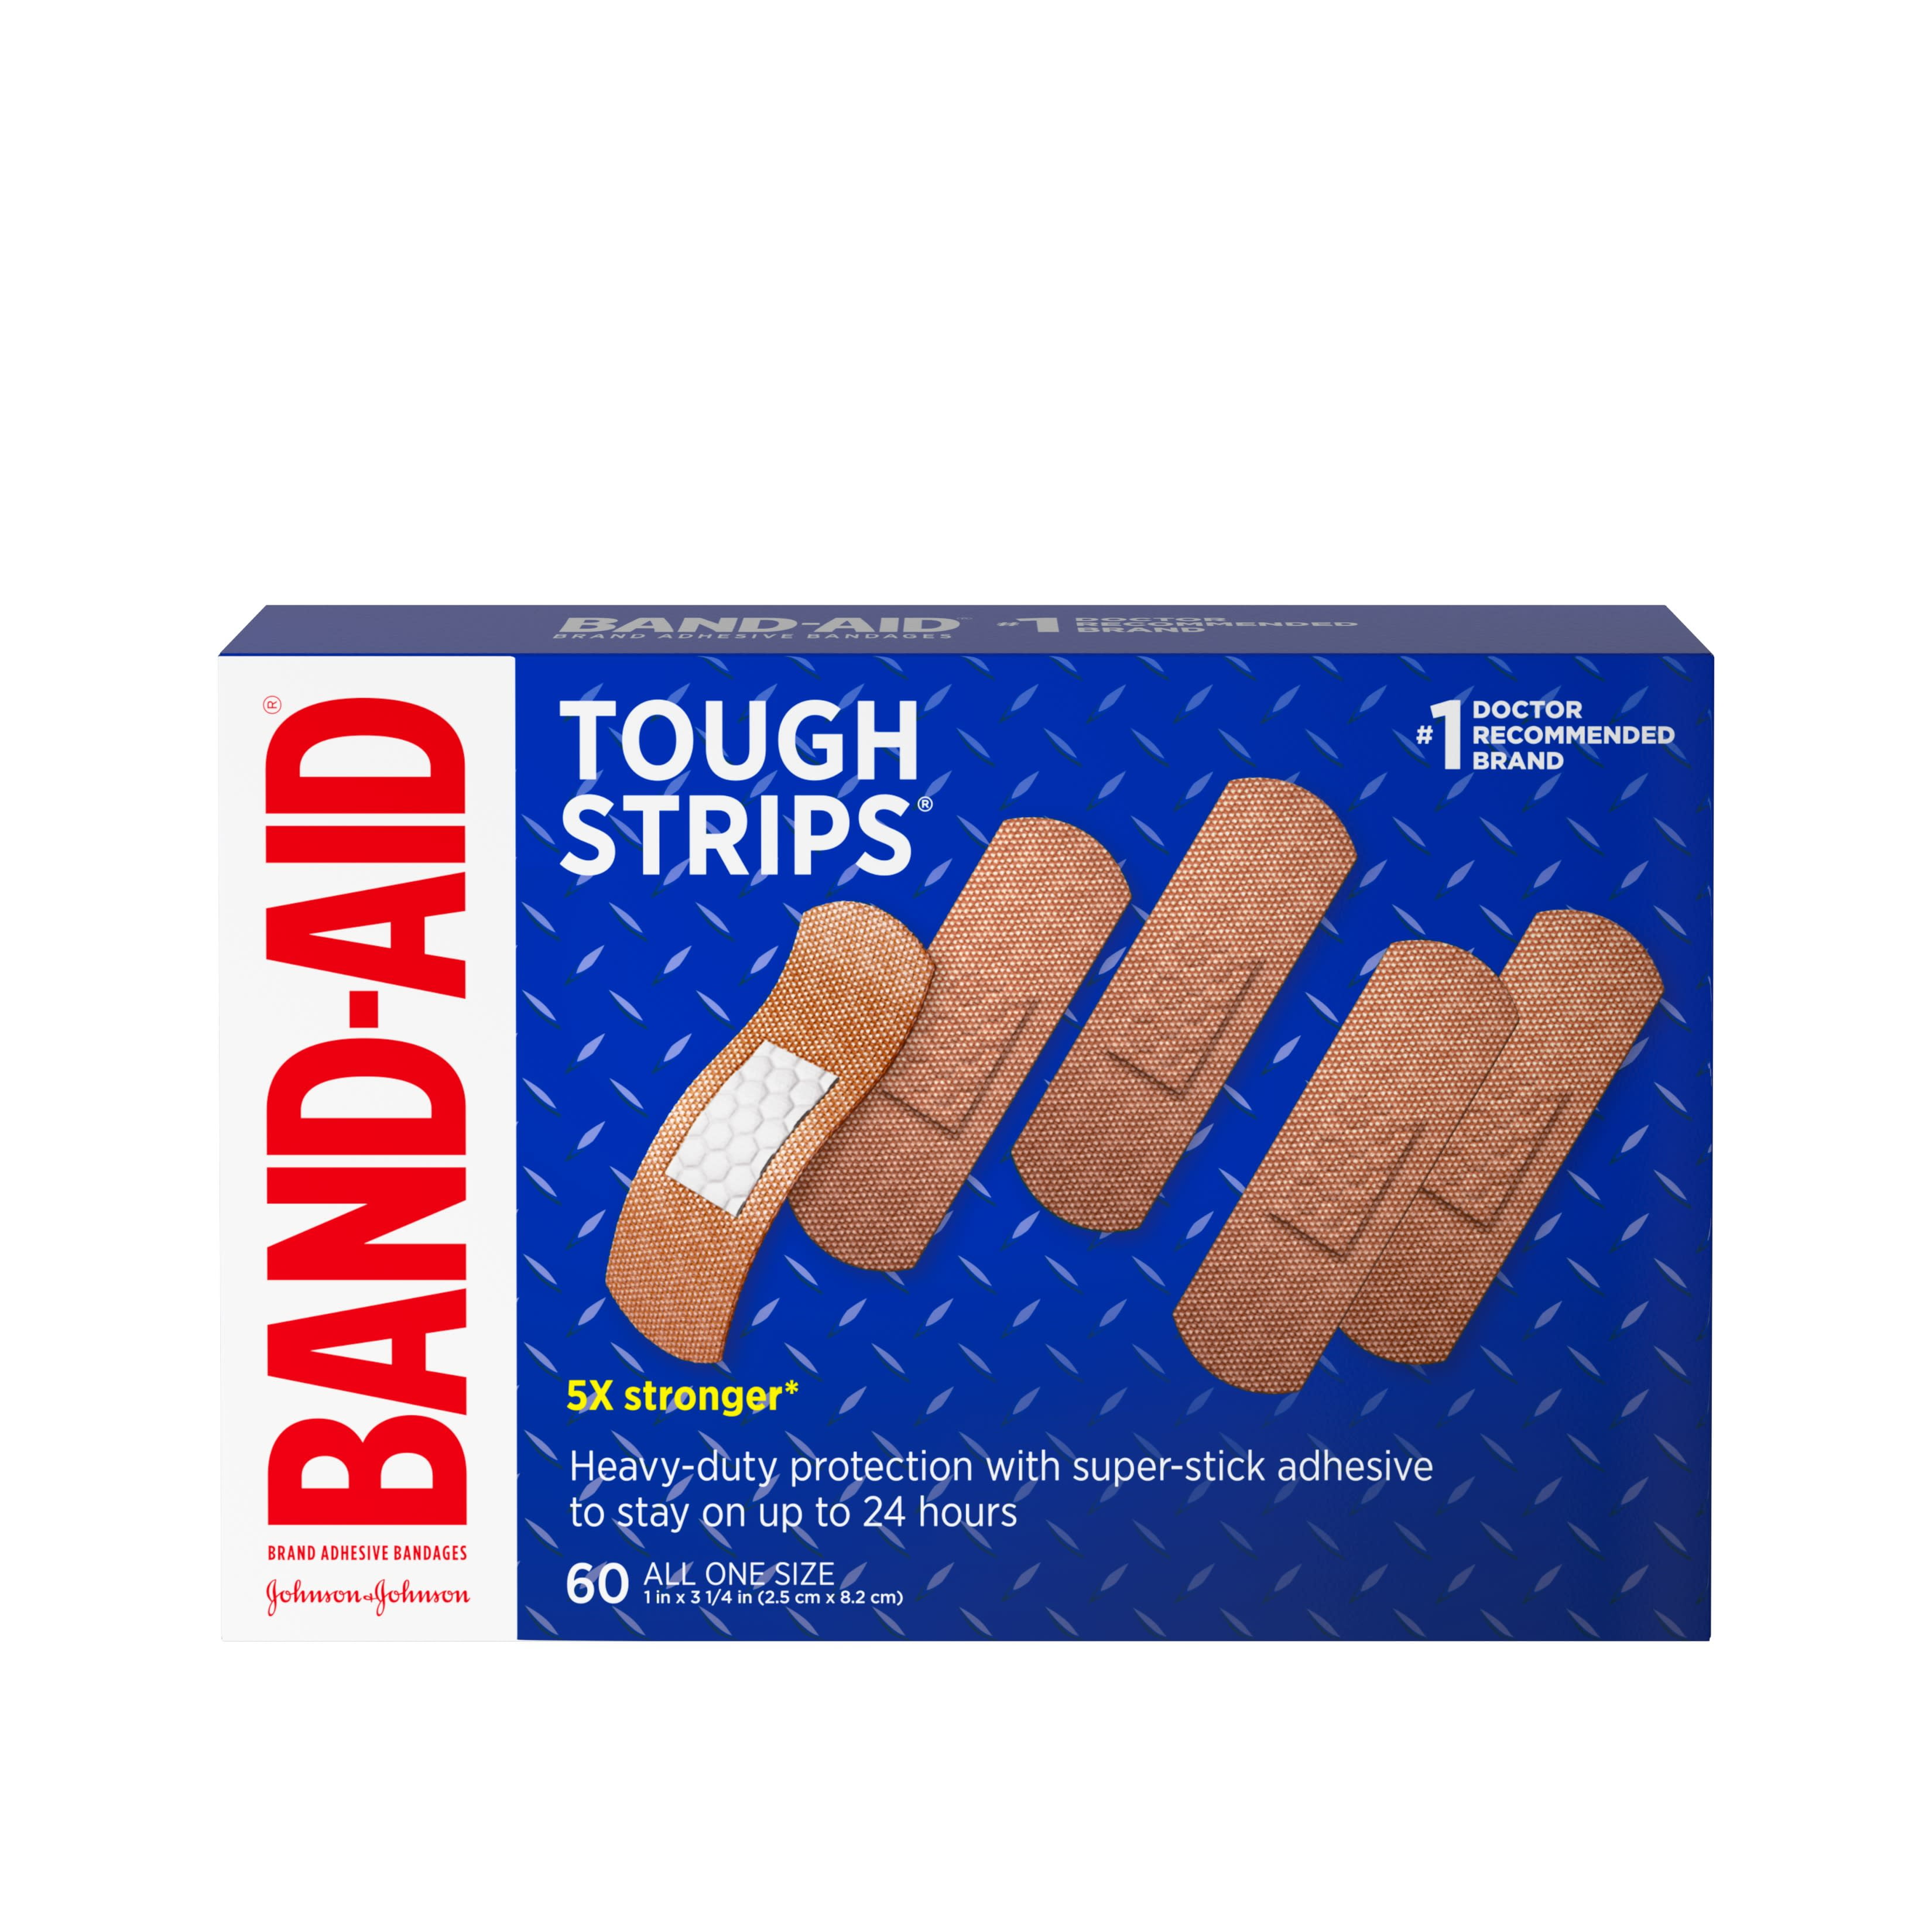 band-aid-brand-tough-strips-adhesive-bandage-all-one-size-60-ct